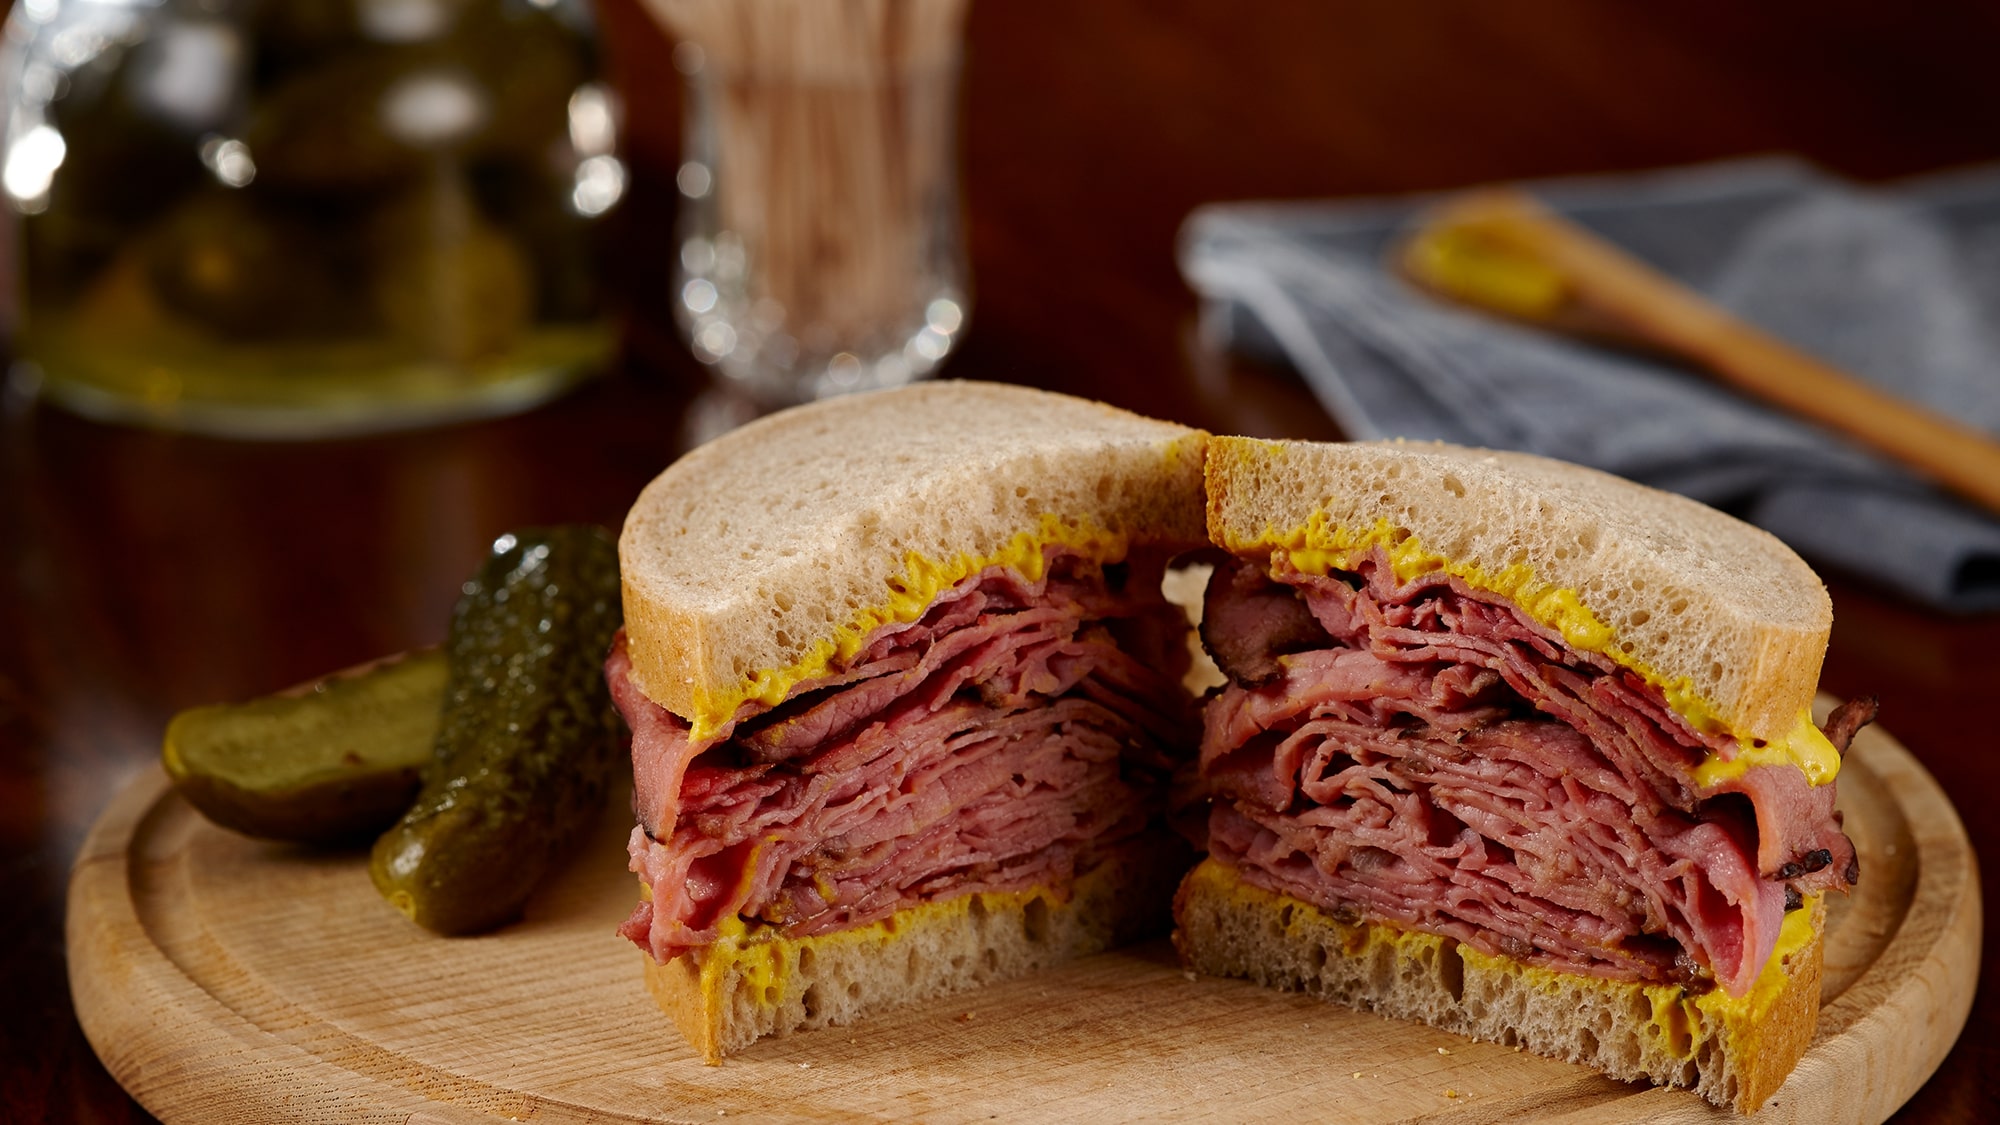 frenchs_smoked-meat-sandwich_styled-image-3_2000x1125.jpg